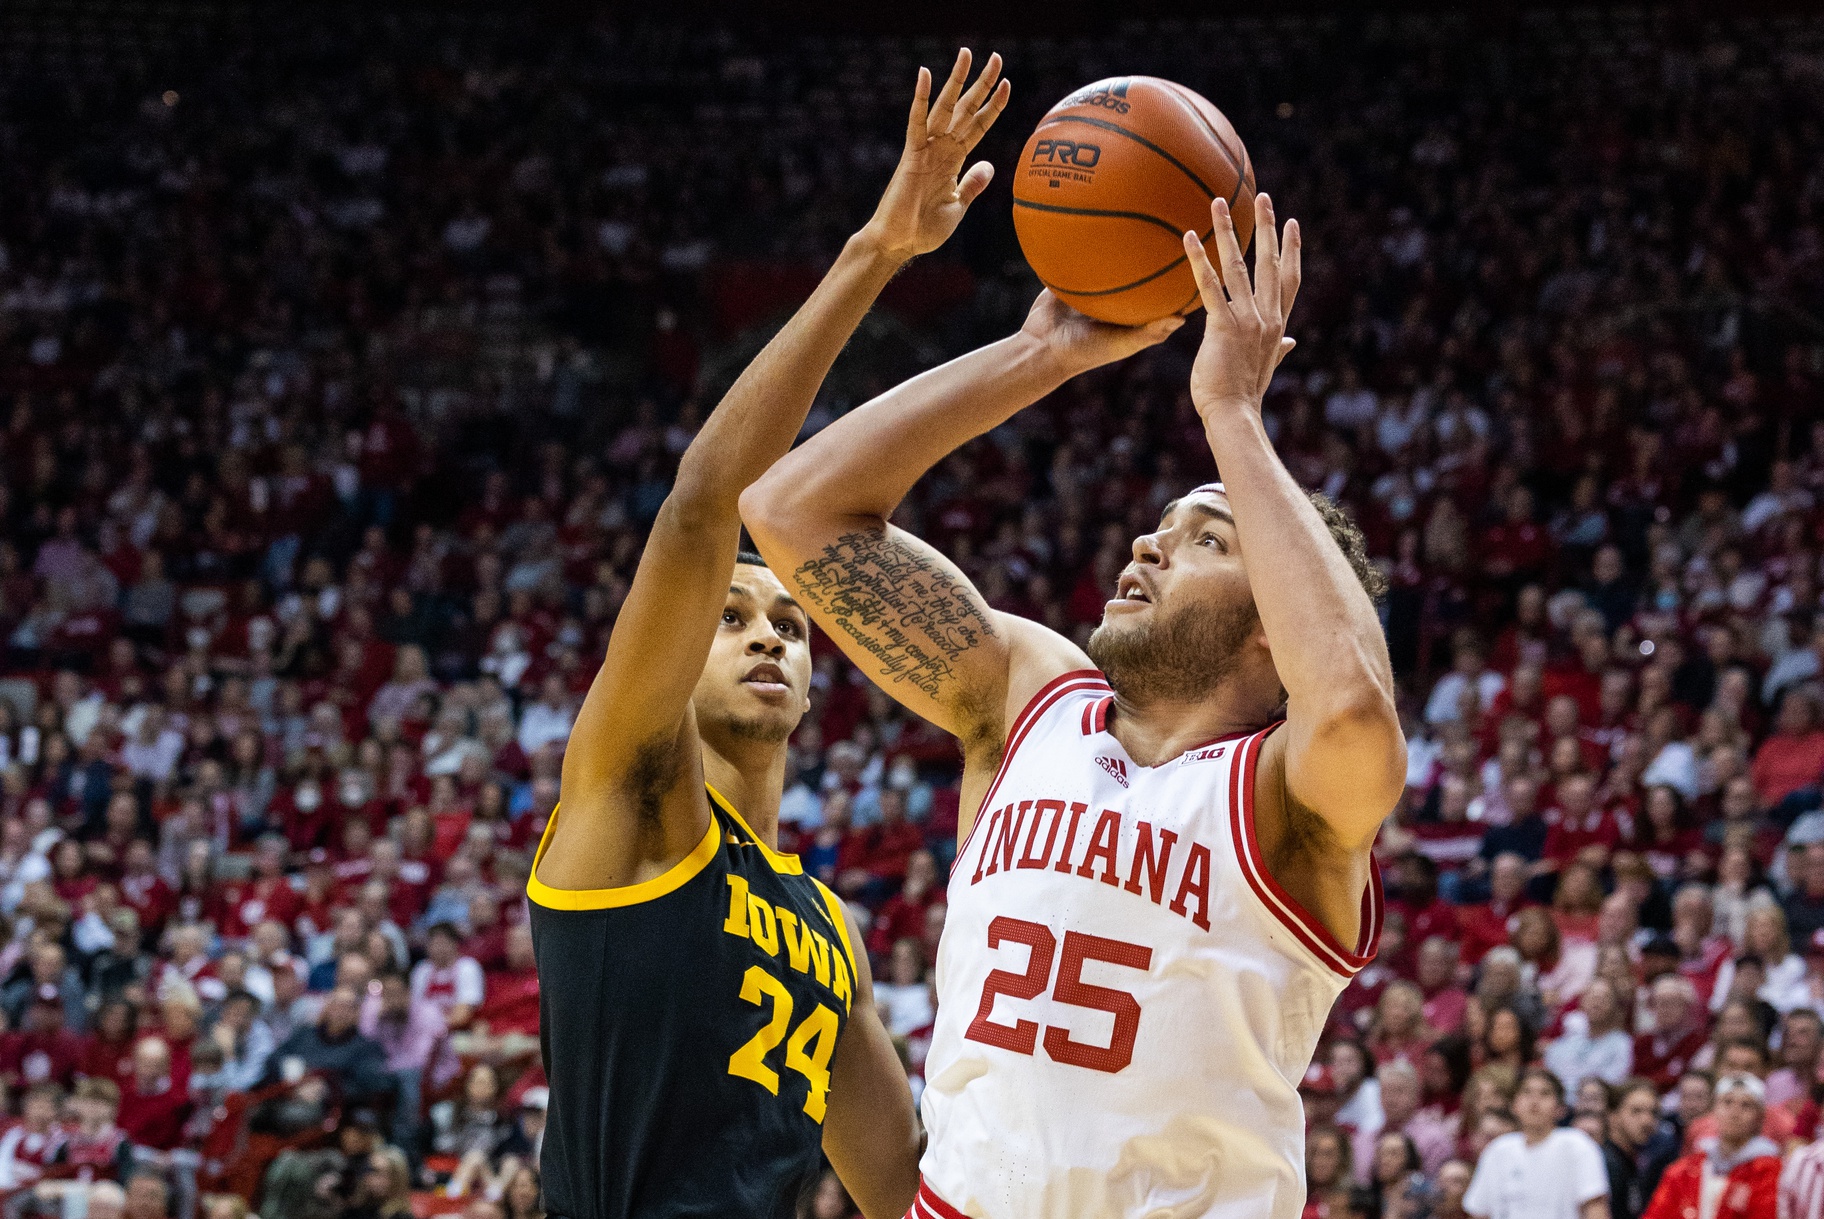 Indiana Hoosiers forward Race Thompson (25) shoots the ball while Iowa Hawkeyes forward Kris Murray (24) defends in the first half at Simon Skjodt Assembly Hall.